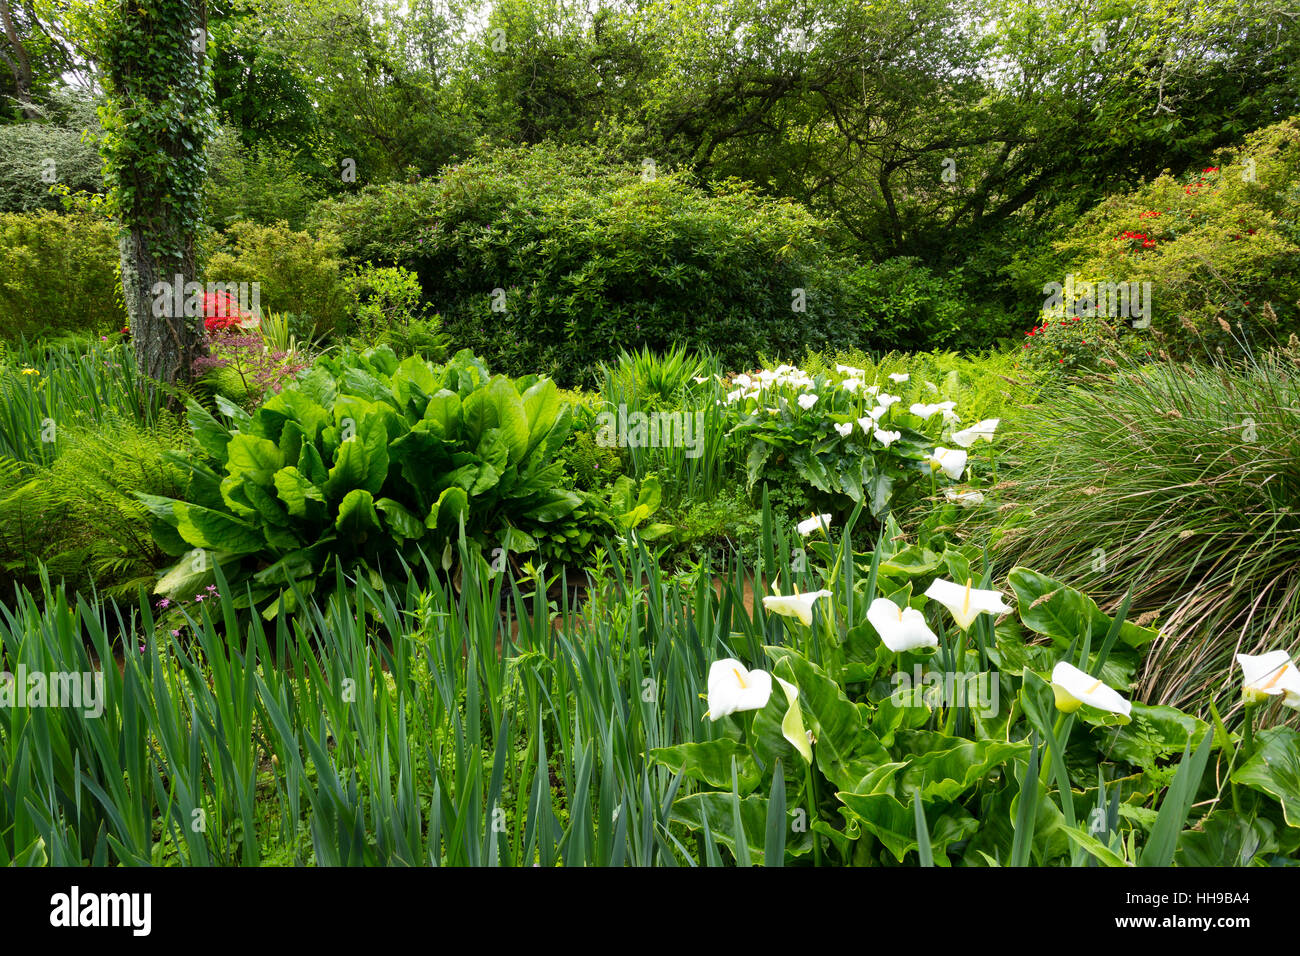 Garden in homage to Jacques Prévert. France, Manche , Saint-Germain-des-Vaux, calla lily (Zantedeschia aethiopica), large leaves of Lysichiton... Stock Photo